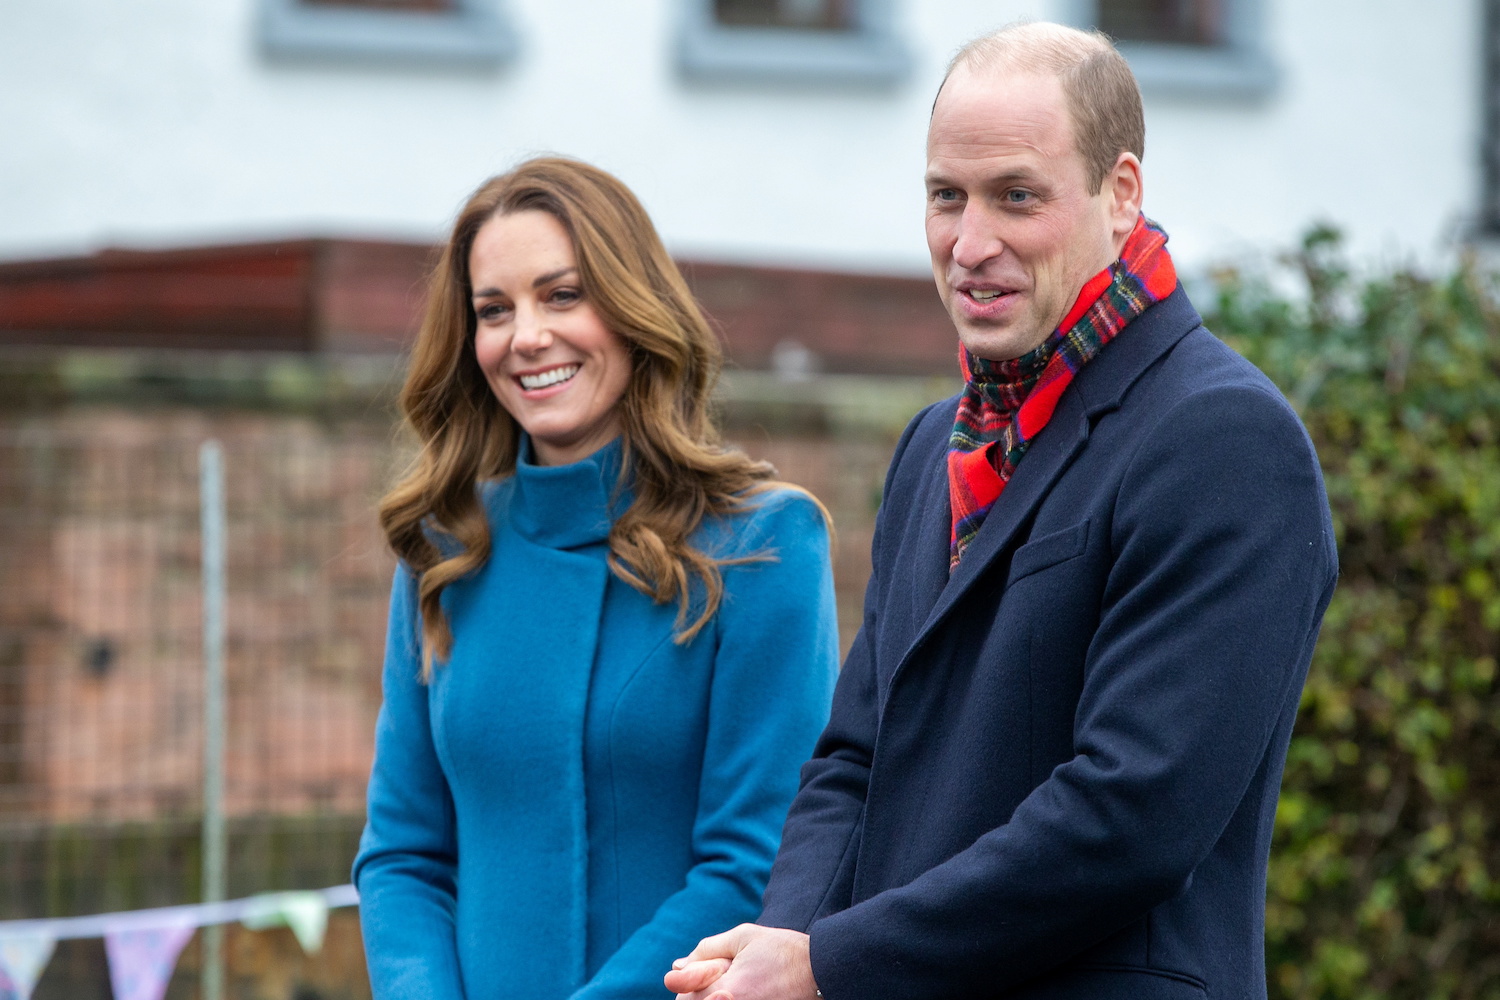 Kate Middleton's Dual Health Crisis: Battling Cancer and Eating Disorder in Private Struggle